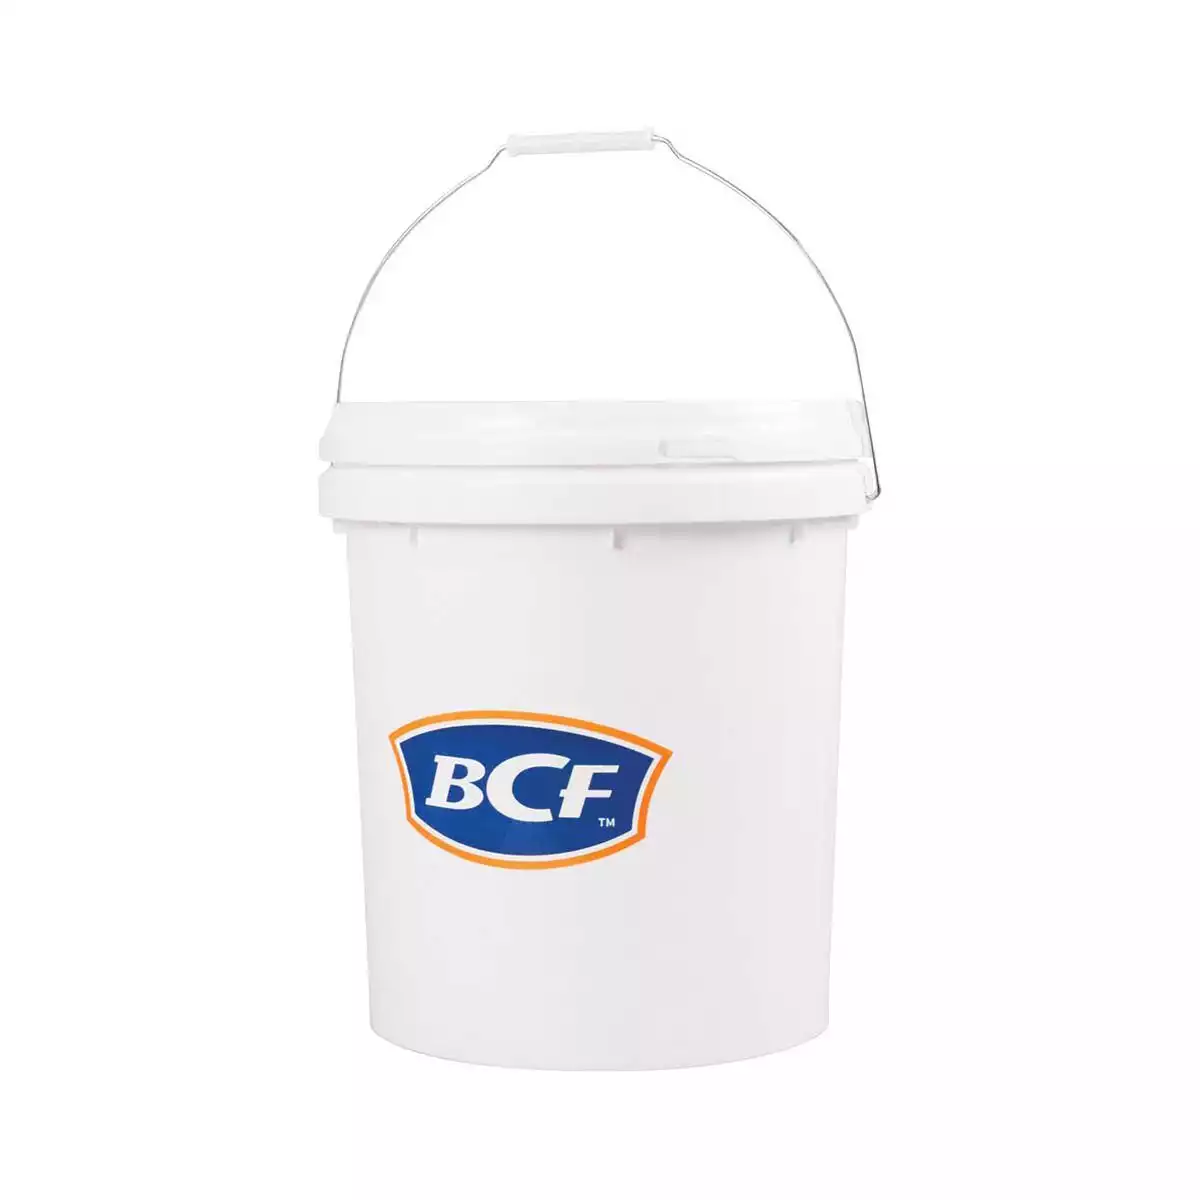 Limited Edition BCF Bucket With Lid 20L clearance event